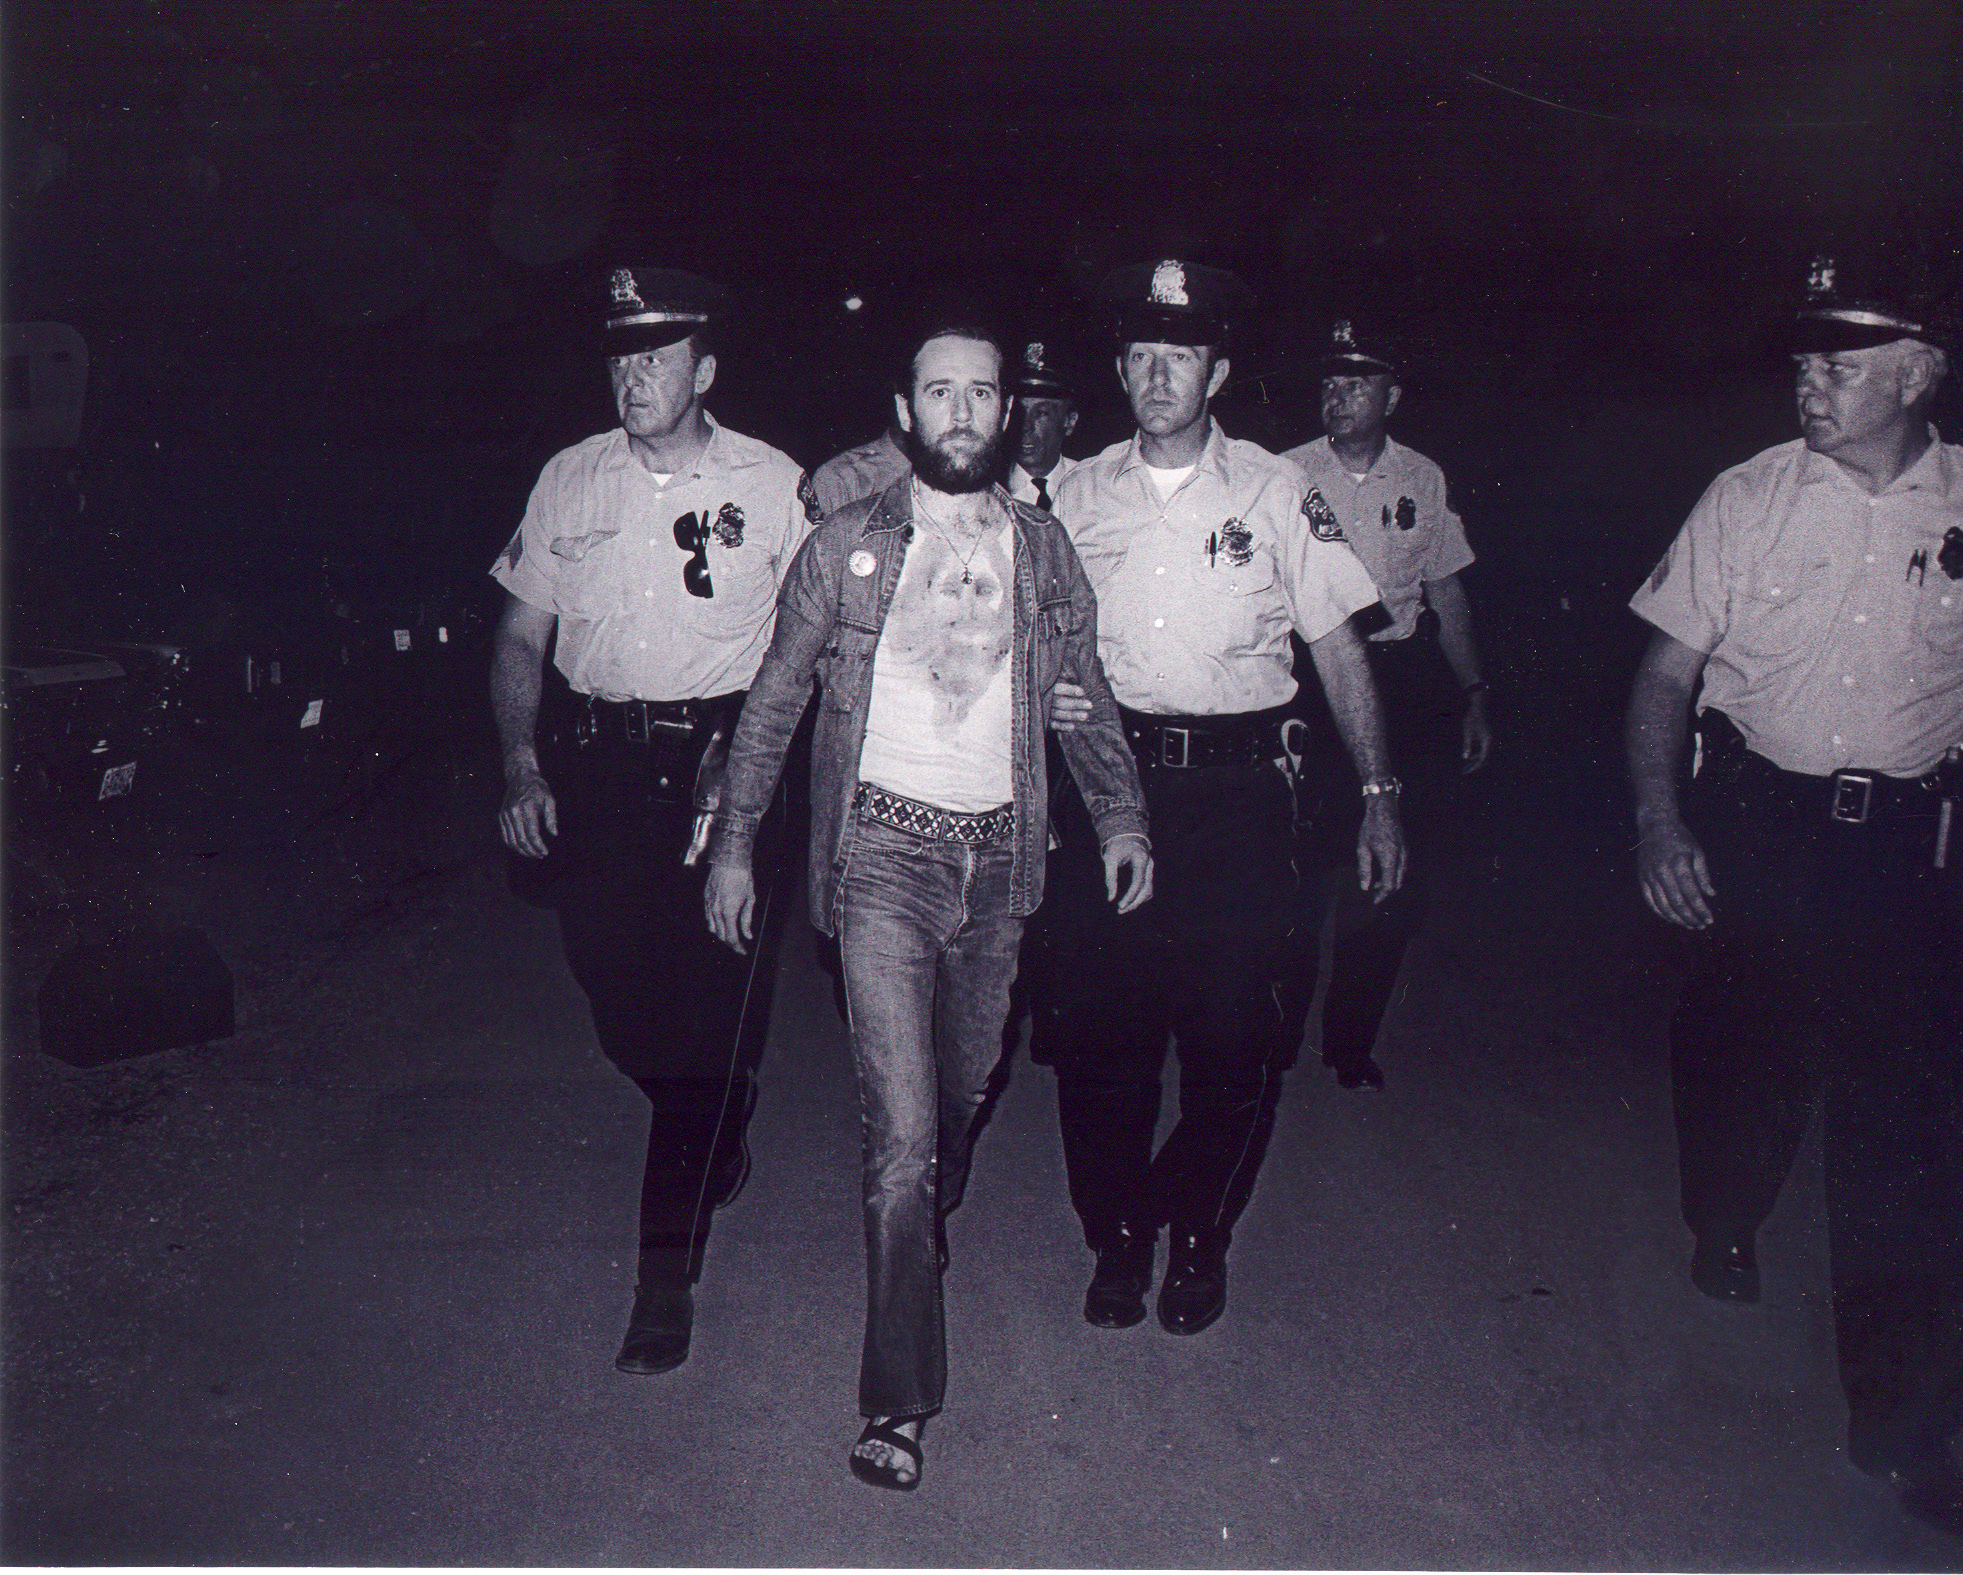 George Carlin being arrested for performing his bit "7 Words You Can Never Say on Television", 1972.